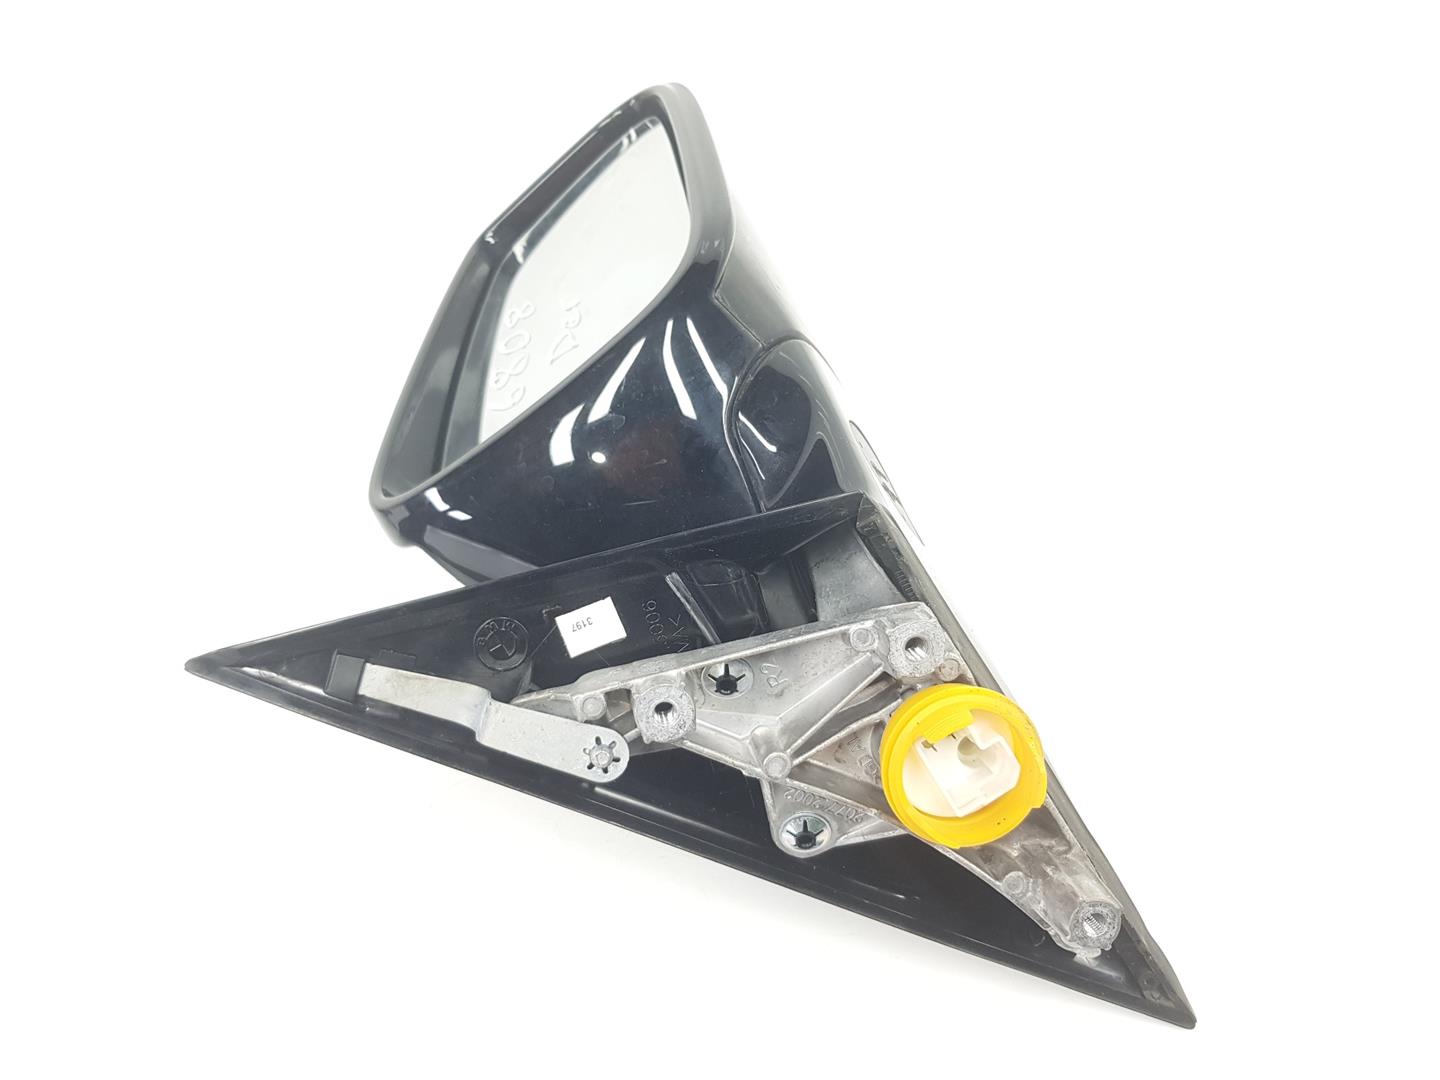 BMW 3 Series F30/F31 (2011-2020) Right Side Wing Mirror A046314, 7345658 23894587